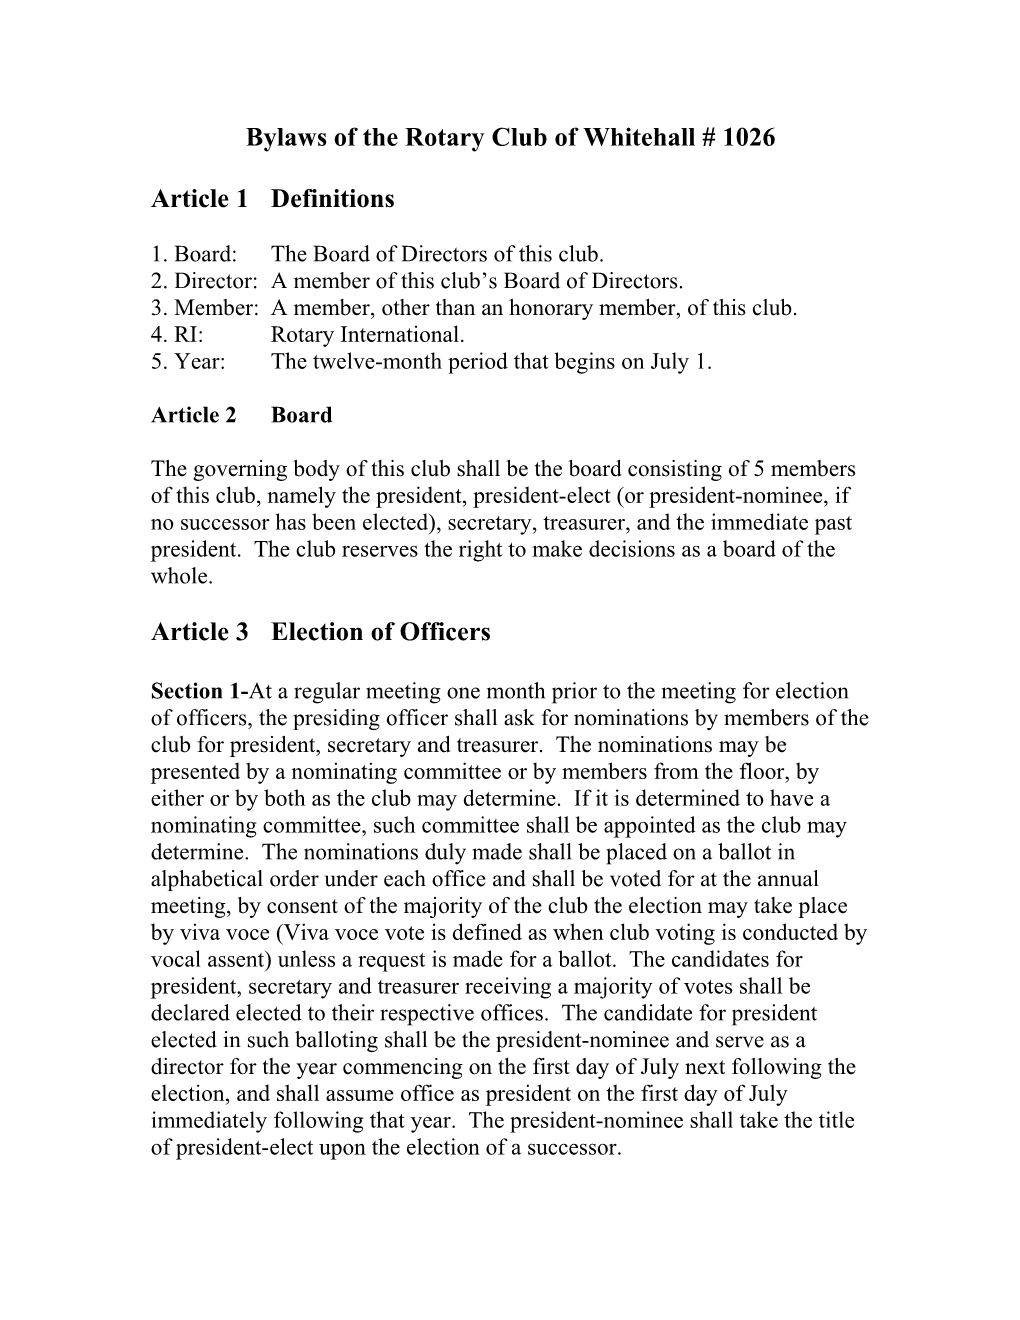 Bylaws of the Rotary Club of Whitehall # 1026